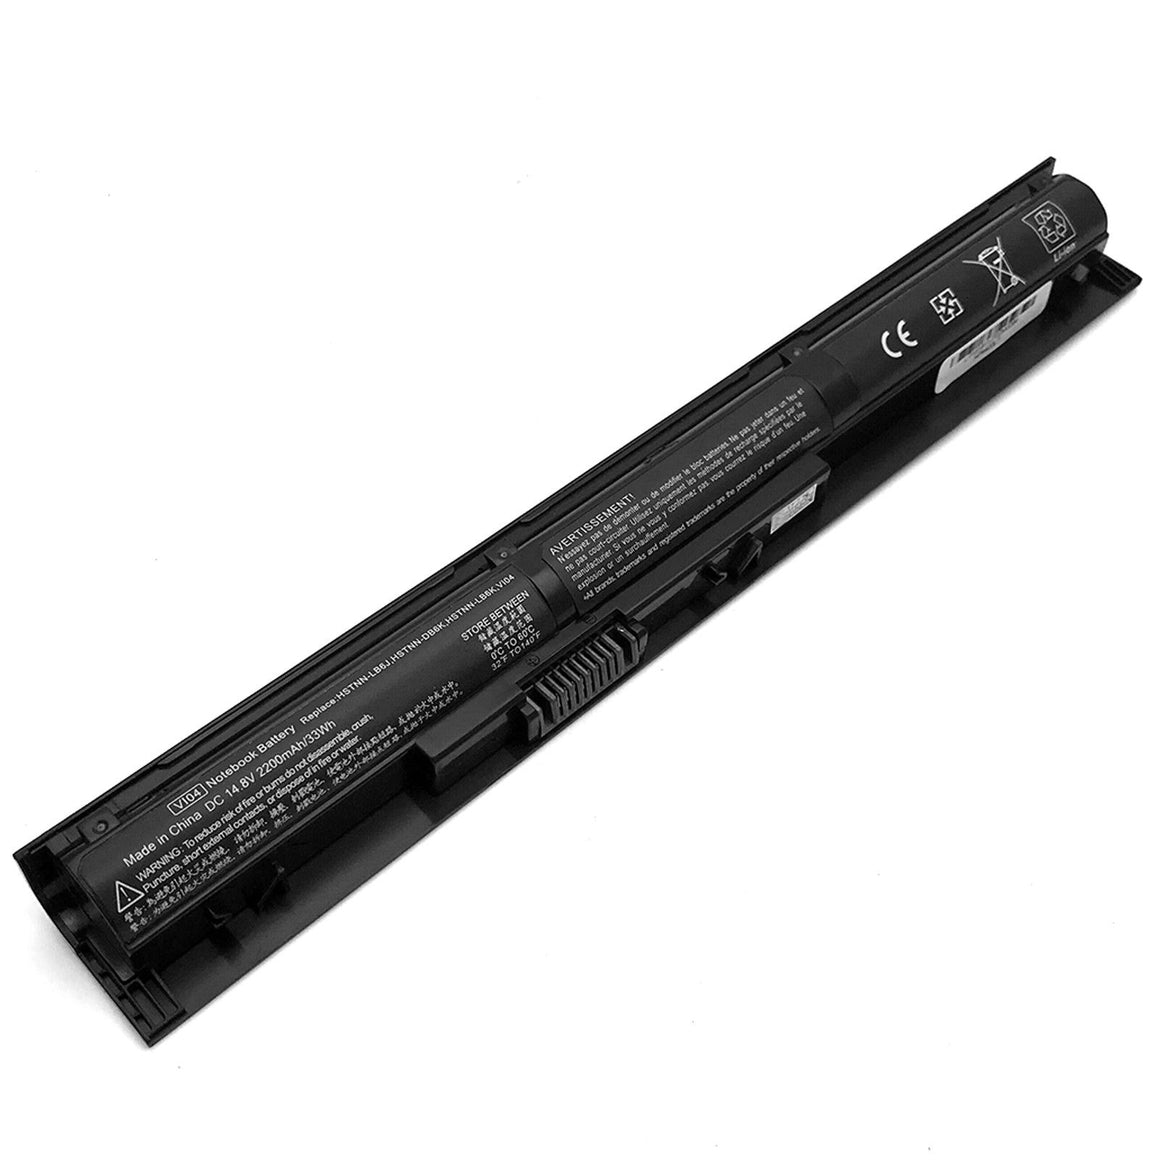 Laptop Generic Battery For HP VI04 756743-001 756745-001 756744-001 75